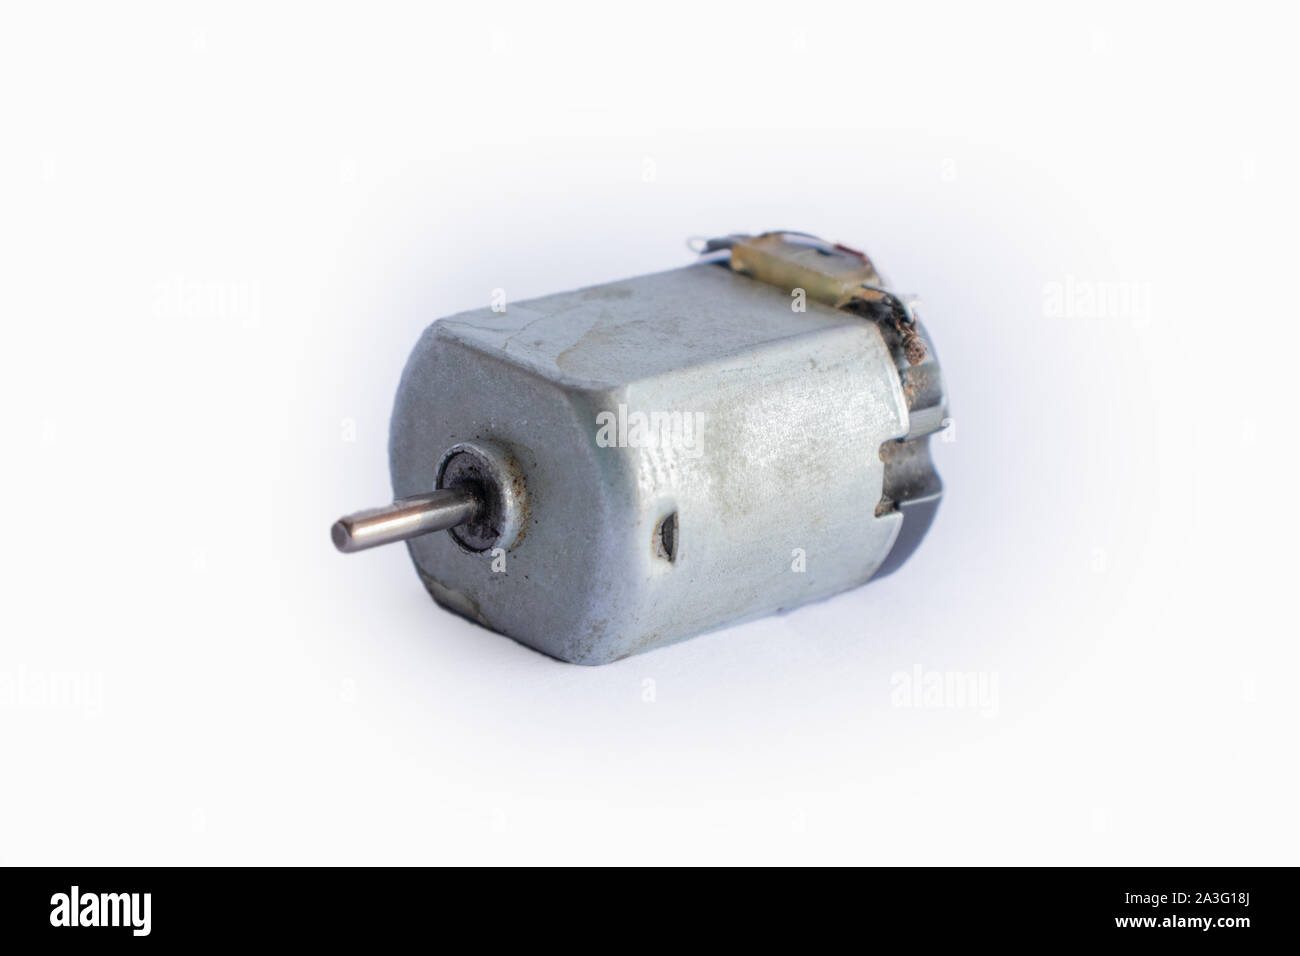 67 12v Dc Motor Images, Stock Photos, 3D objects, & Vectors